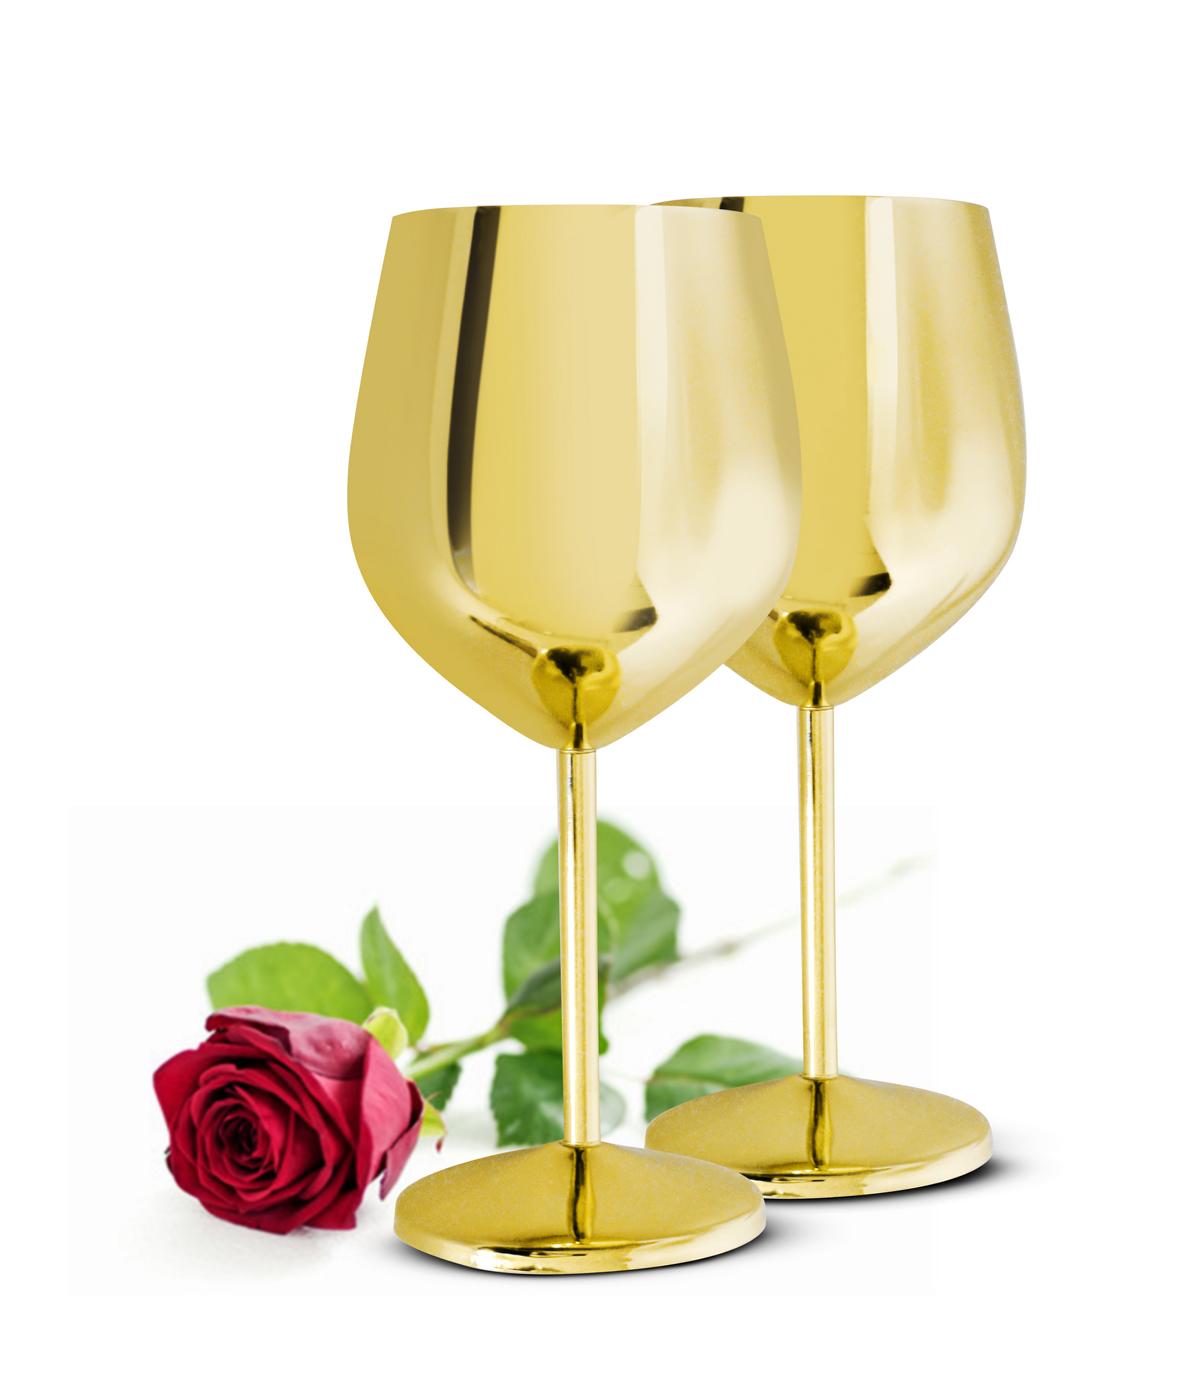 2 wine glasses 510ml gold stainless steel wine goblet/cup red wine glass unbreakable